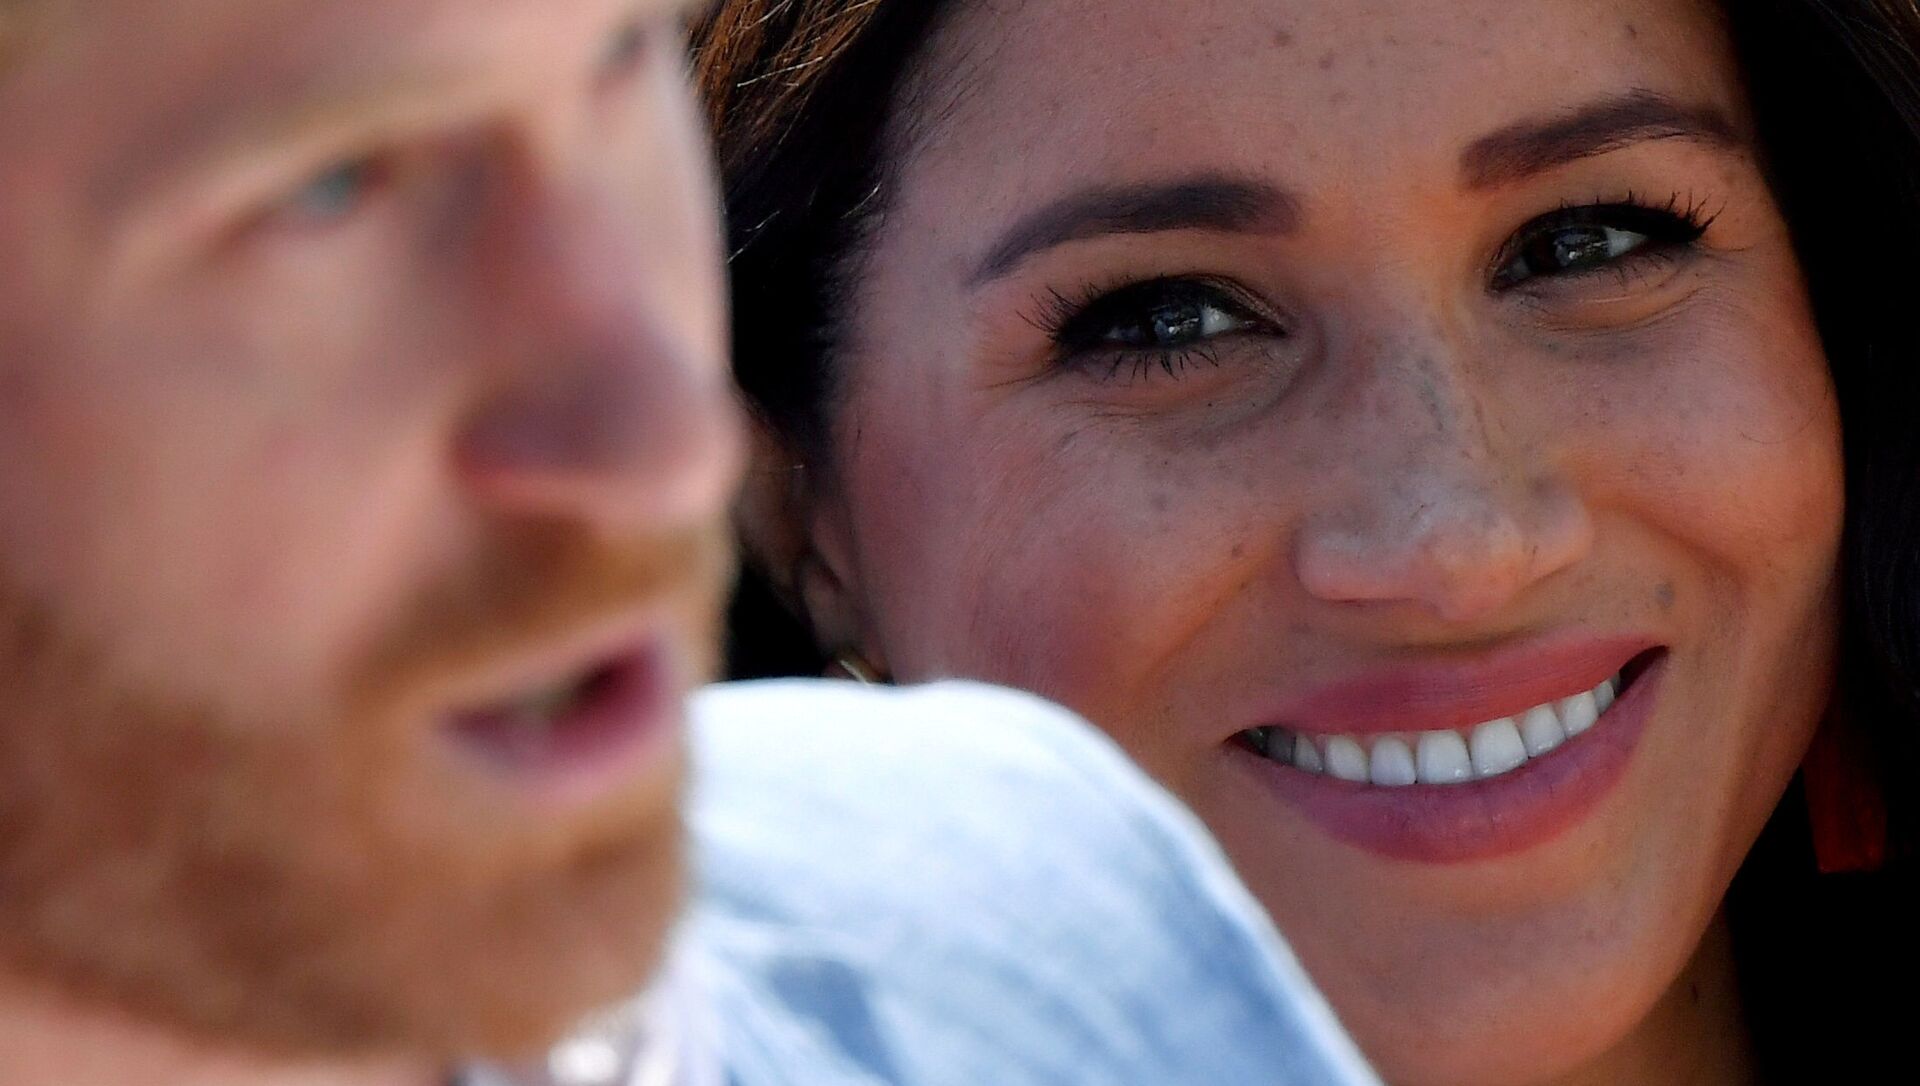 FILE PHOTO: Britain's Meghan, Duchess of Sussex, looks on as Prince Harry, Duke of Sussex, gives a speech, during a visit to the Youth Employment Services (YES) Hub in Tembisa township, near Johannesburg, South Africa, October 2, 2019 - Sputnik International, 1920, 04.07.2021